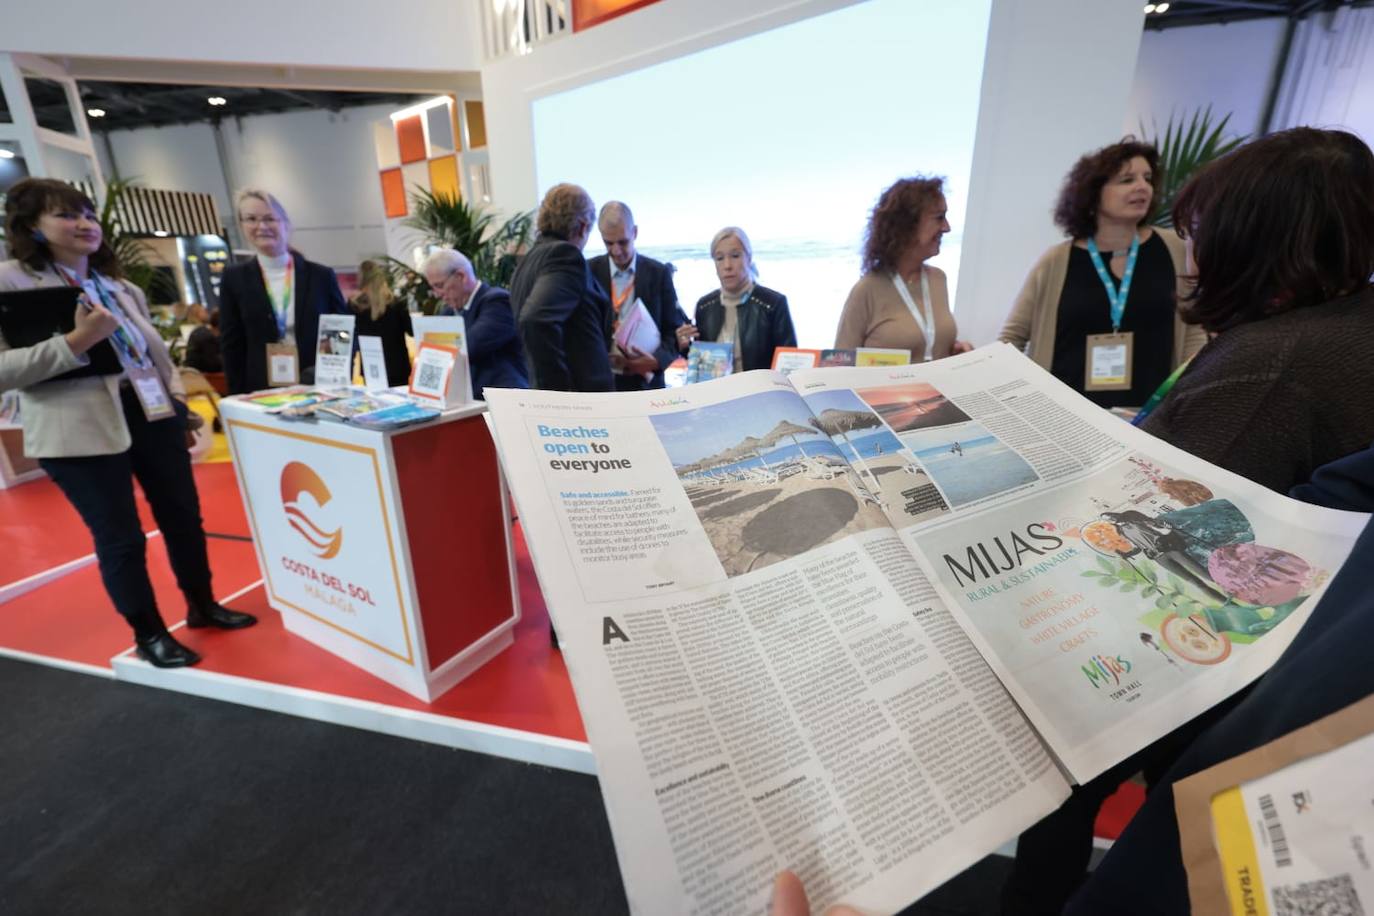 In pictures: World Travel Market in London - day two